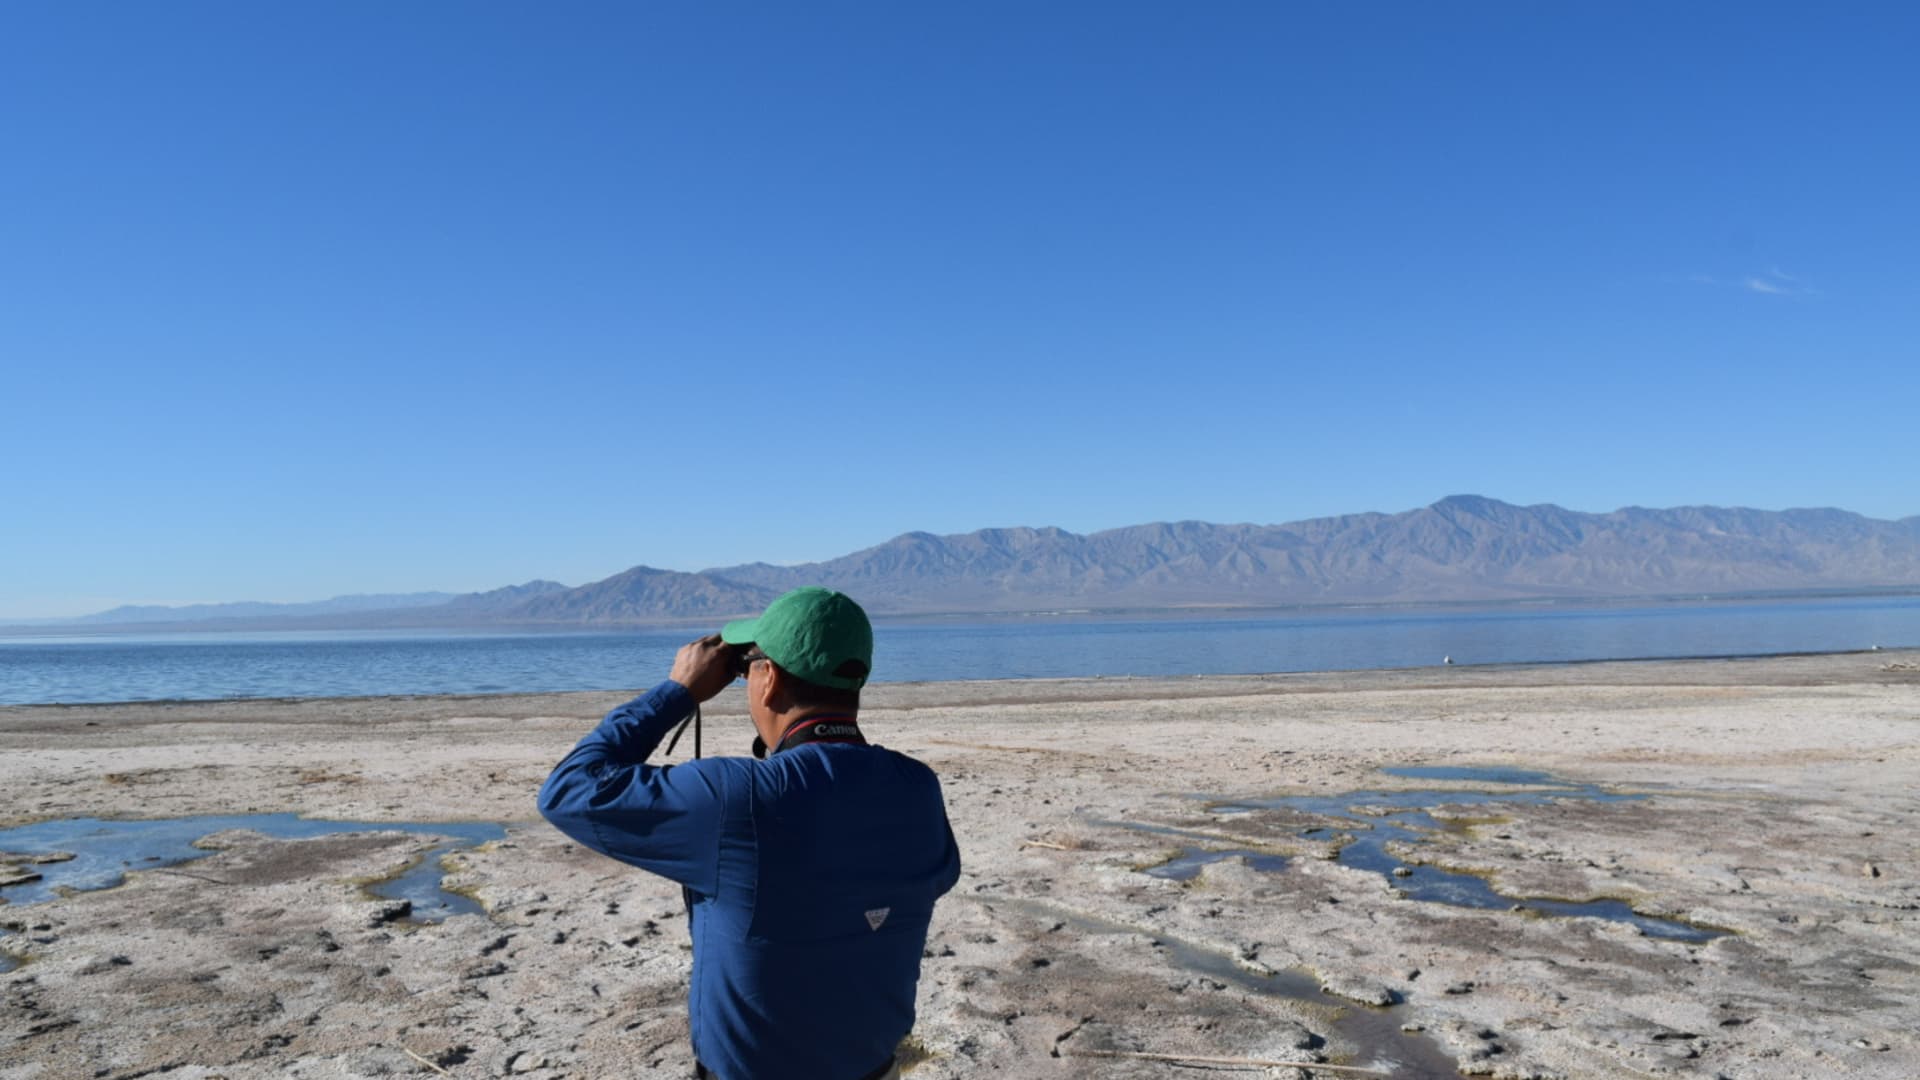 Frank Ruiz, Audubon's Salton Sea Program Director, searches for signs of bird activity on the northeastern shore of the Salton Sea. The lake's once thriving ecosystem is deteriorating as the shoreline recedes and salinity increases.